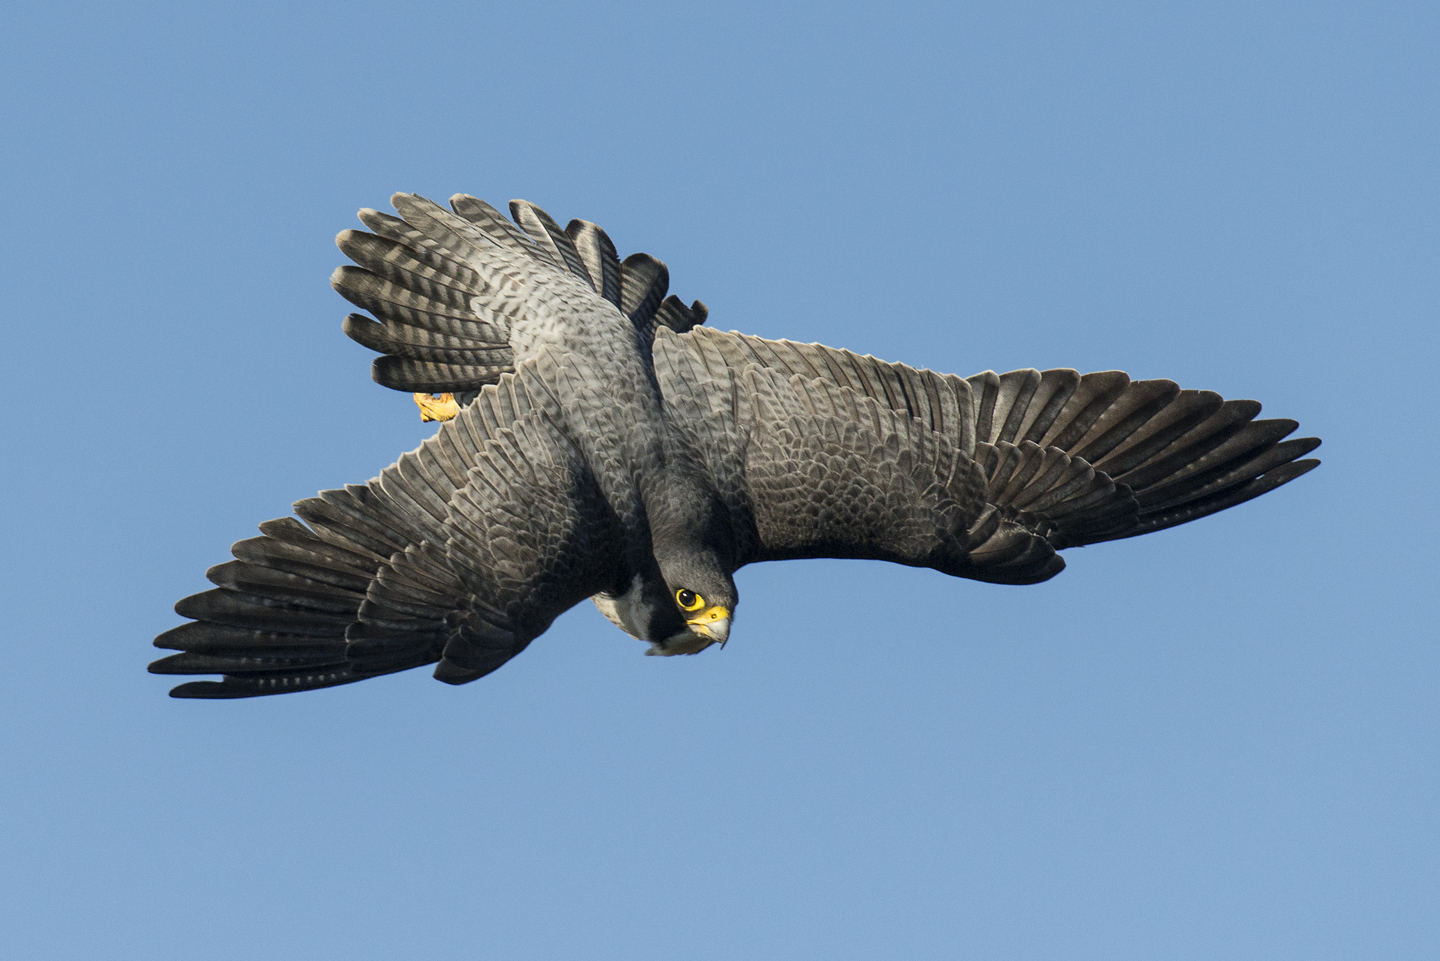  The peregrine falcon. Ruthless killer, graceful aerial acrobat and fastest creature on the planet 